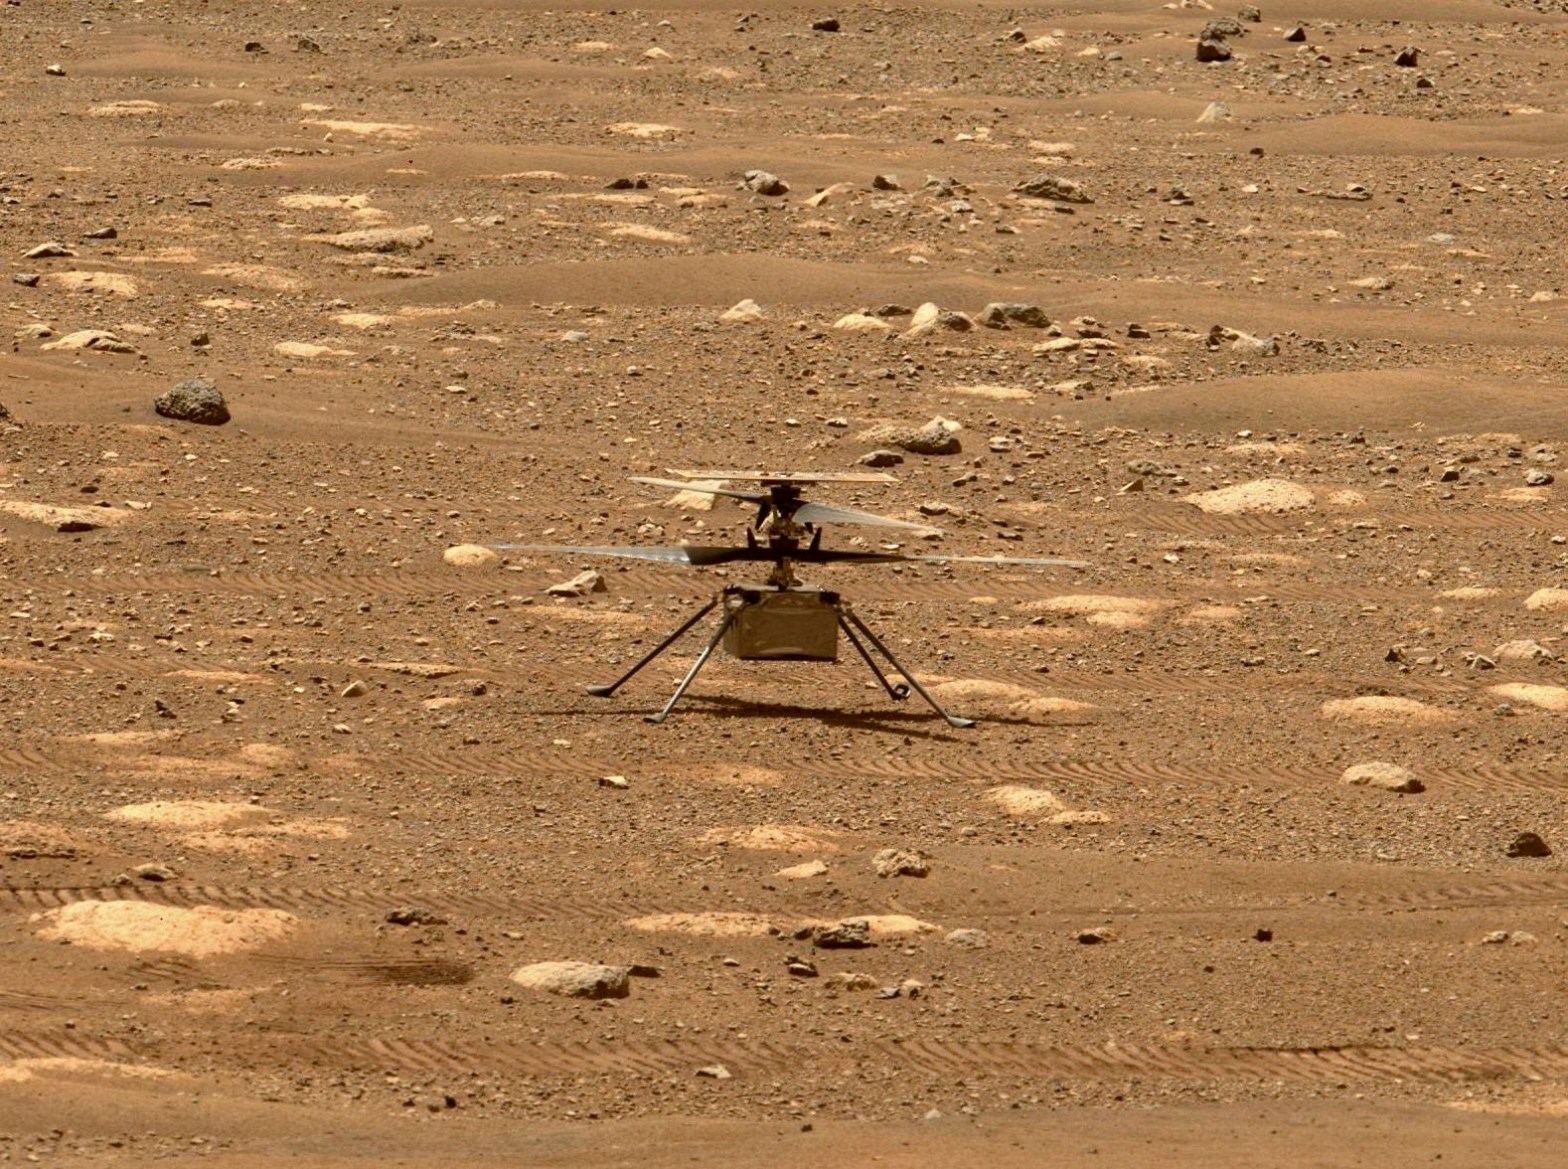 NASA's Ingenuity helicopter unlocked its rotor blades, allowing them to spin freely, on April 7, 2021. Credit: NASA.